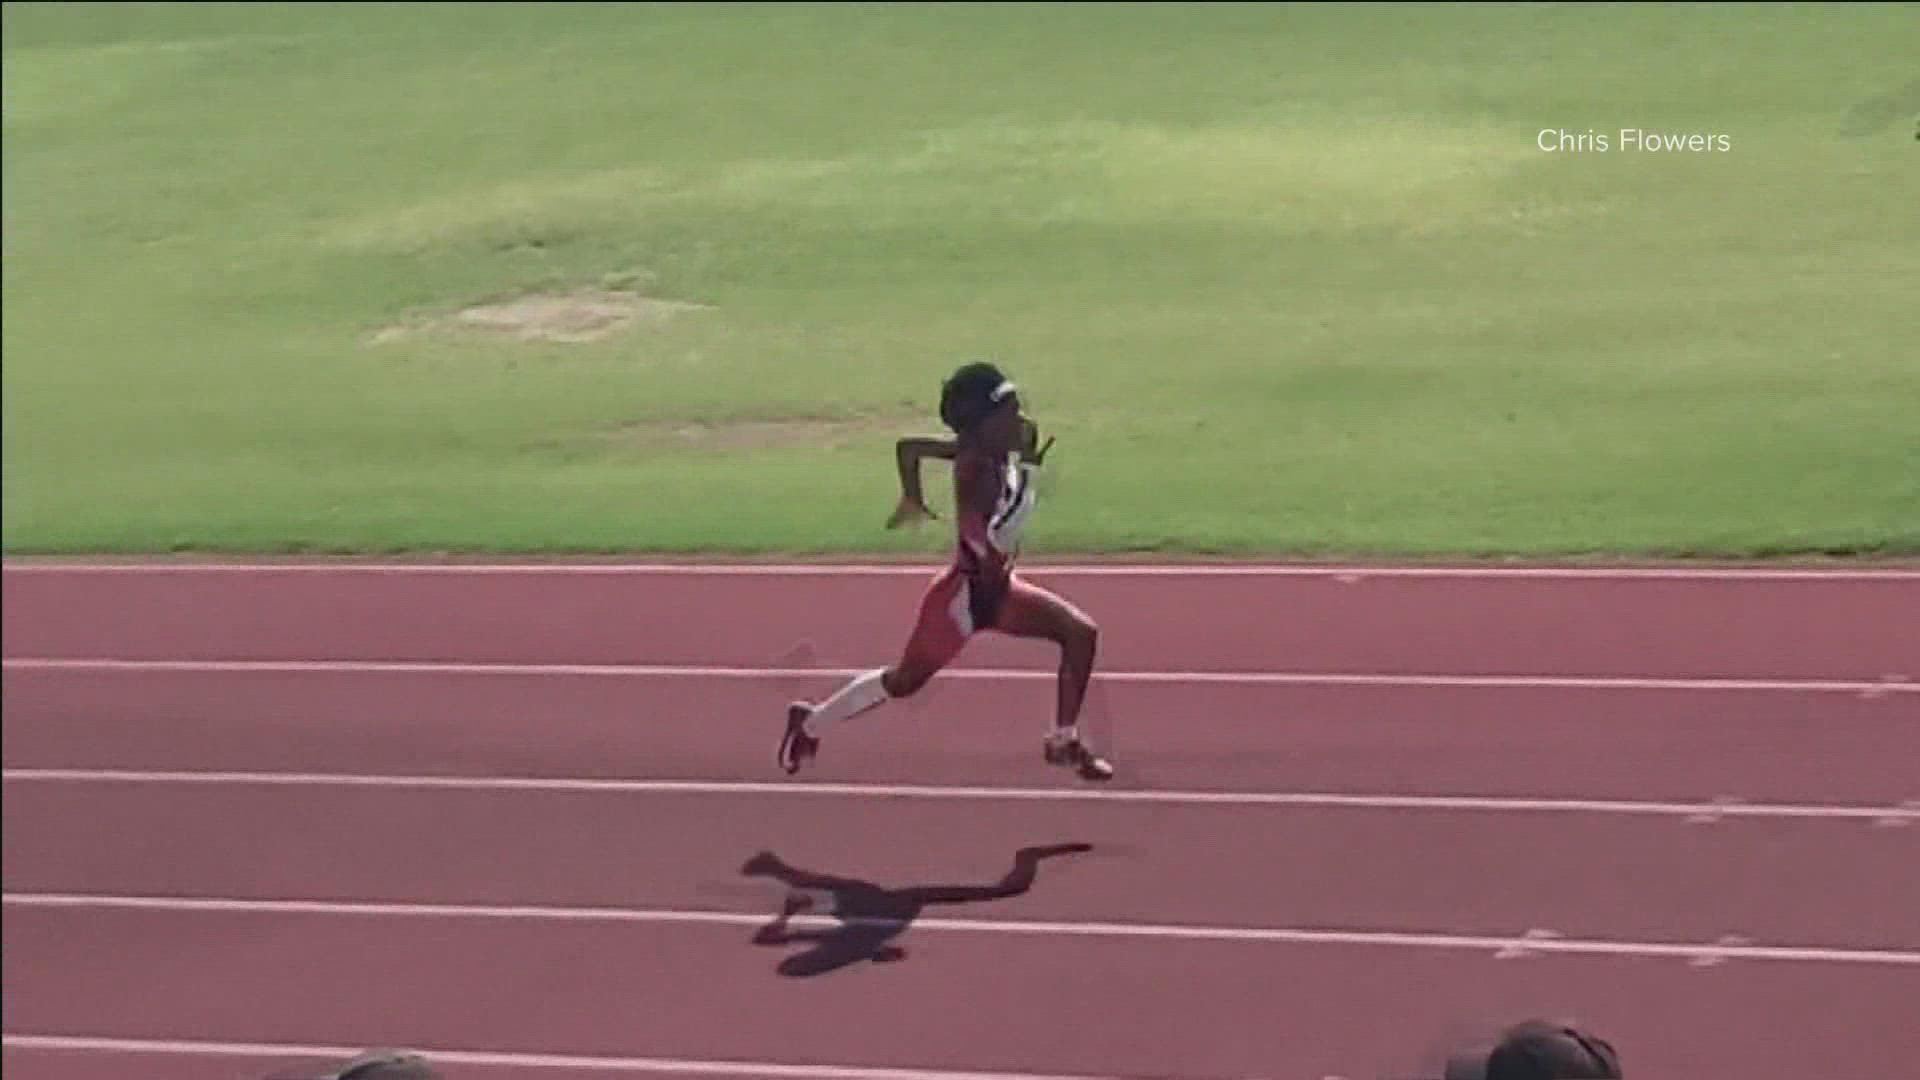 A West Valley third grader has achieved his dream of winning gold at the 2022 USATF Junior Olympics.